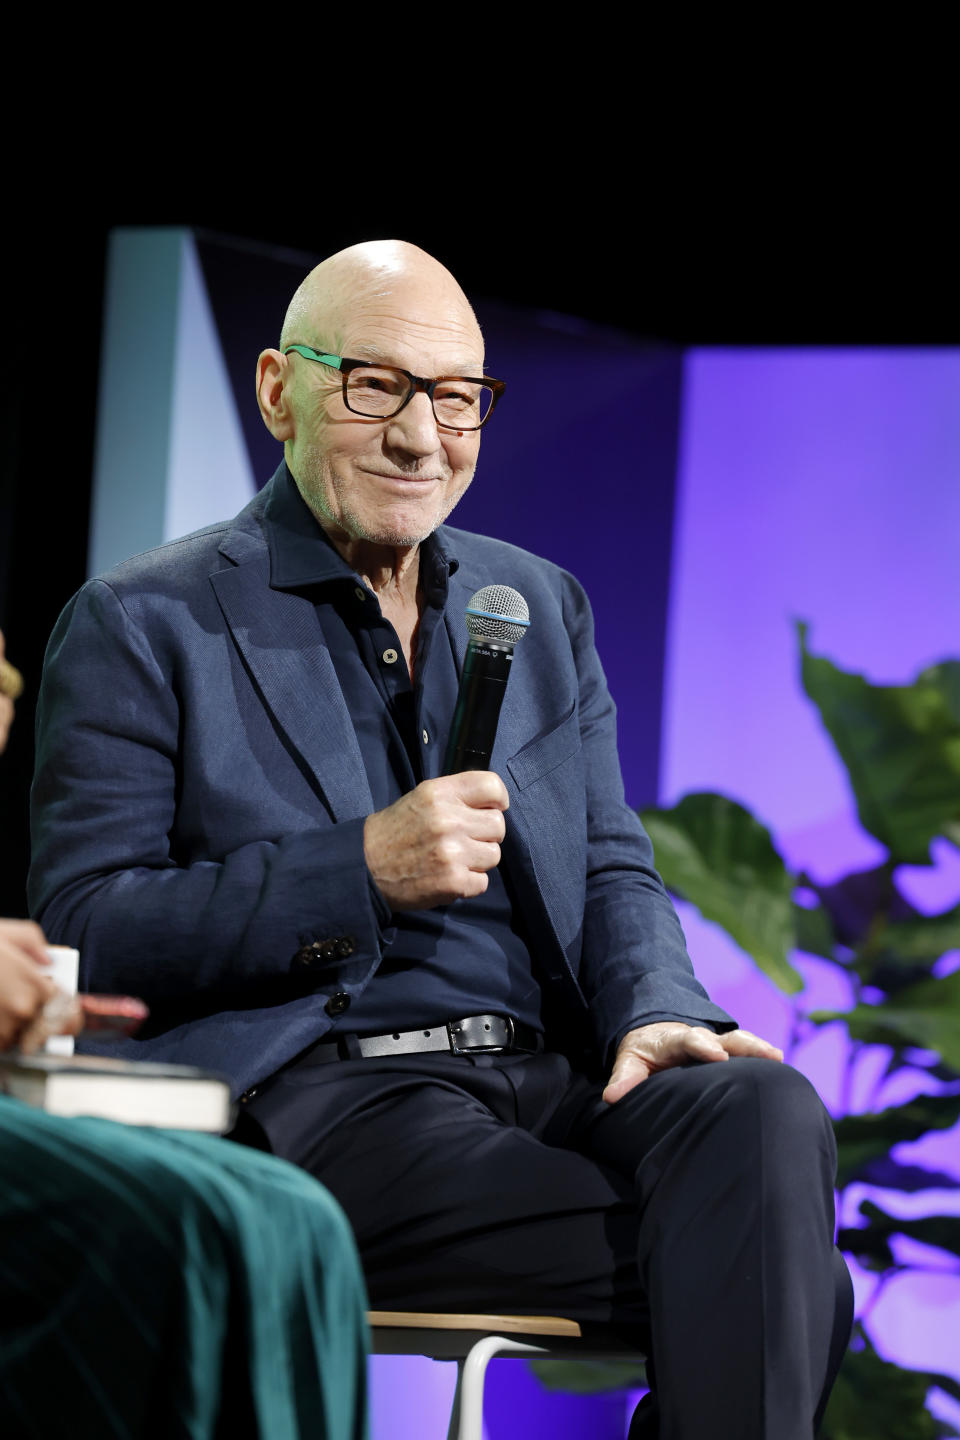 Patrick Stewart in a blazer with a microphone seated on stage, smiling